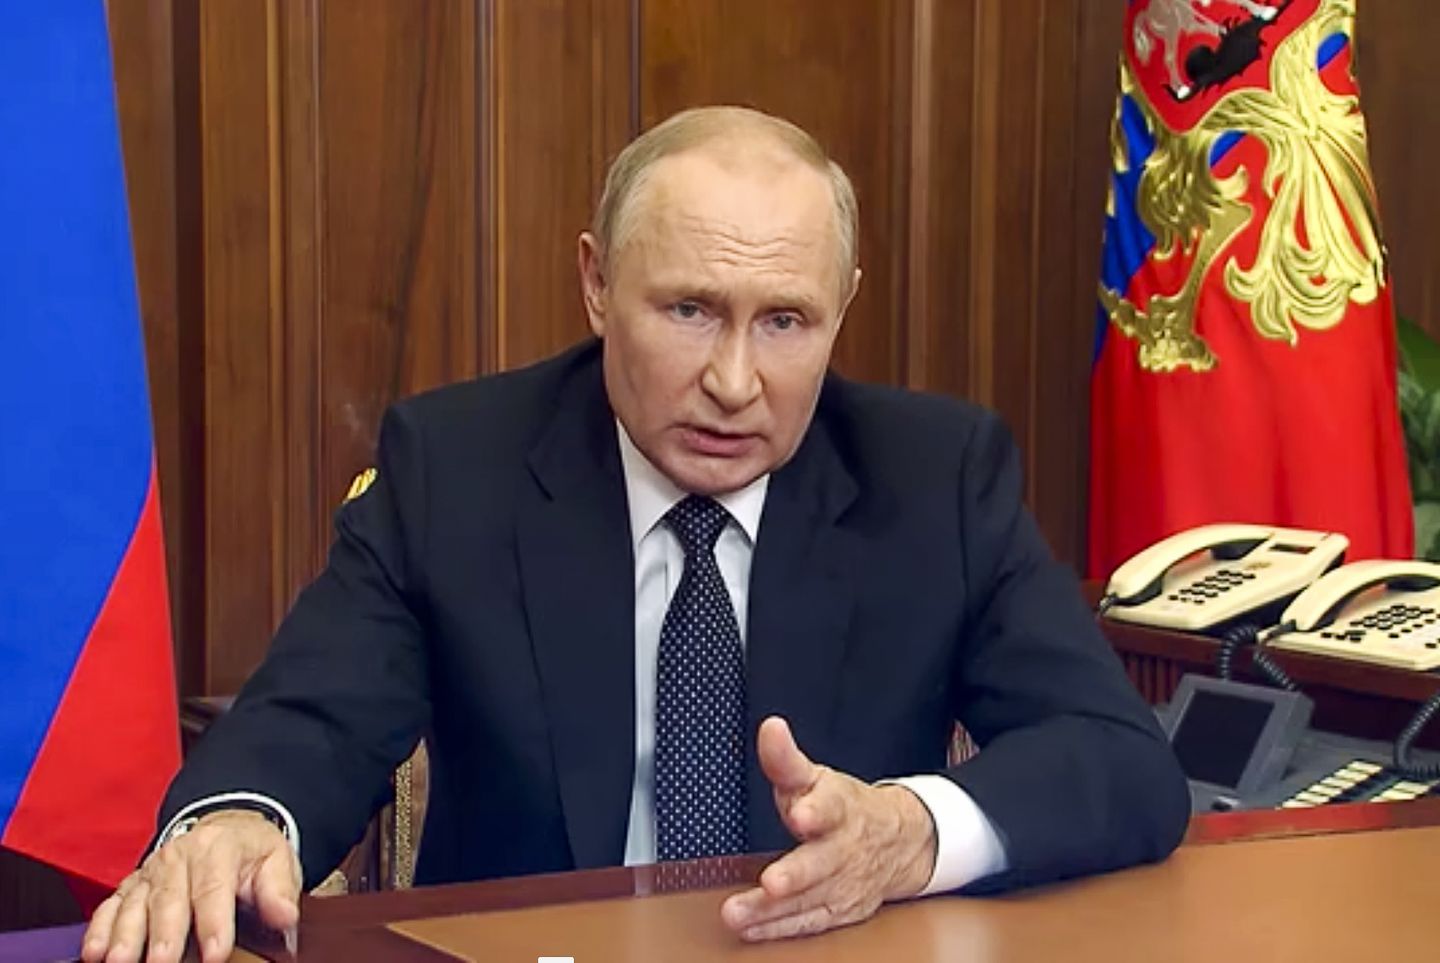 Putin threatens nuclear escalation, mobilizes Russian reserves